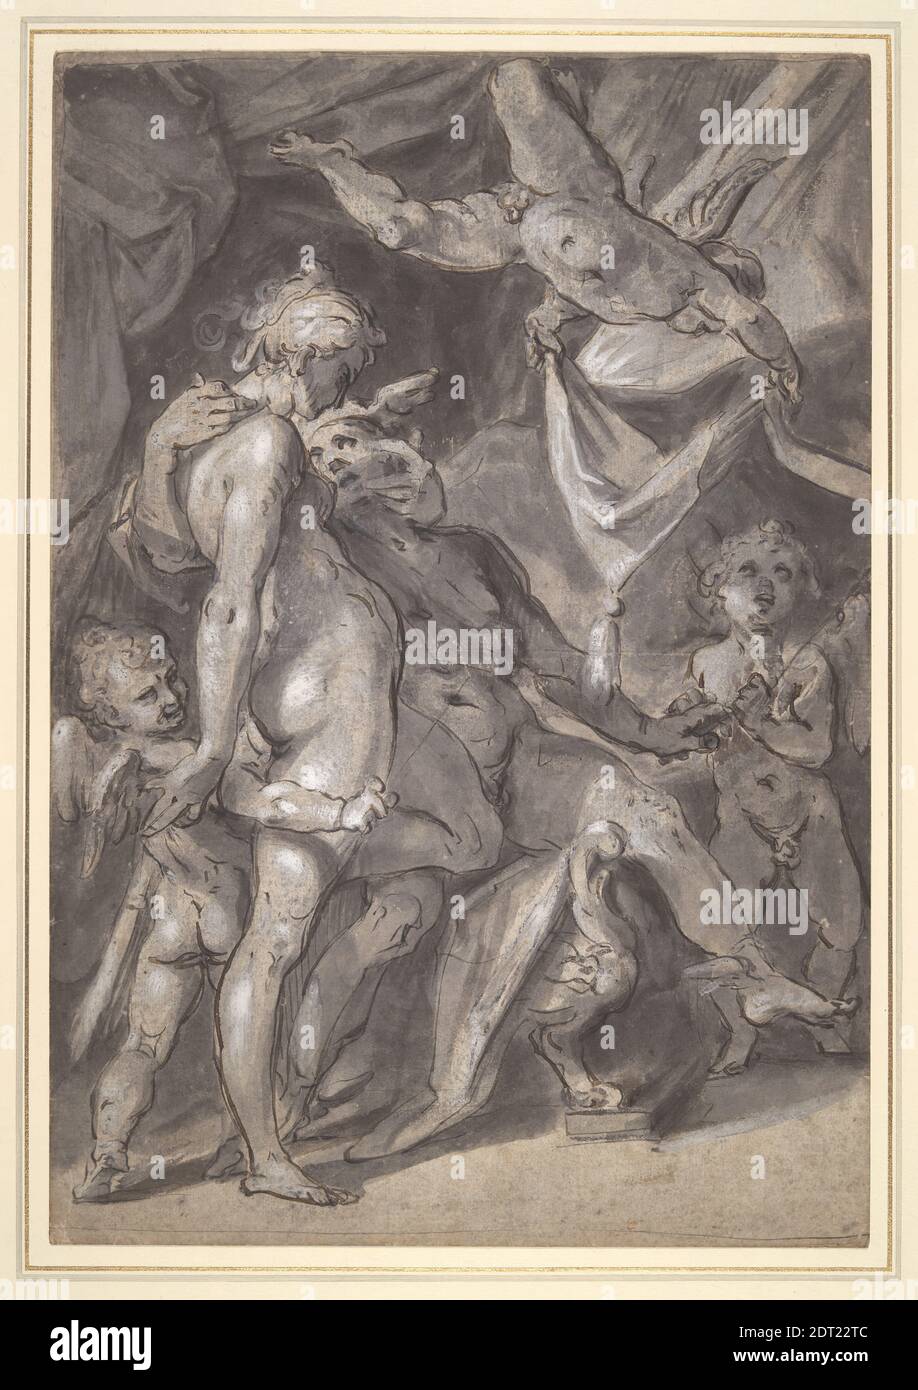 Artist: Bartholomaeus Spranger, Flemish, 1546–1611, Venus and Mercury, ca. 1600, Pen and brown ink and gray wash, heightened with white, sheet: 37 × 25.4 cm (14 9/16 × 10 in.), Made in Flanders, Flemish, 16th century, Works on Paper - Drawings and Watercolors Stock Photo